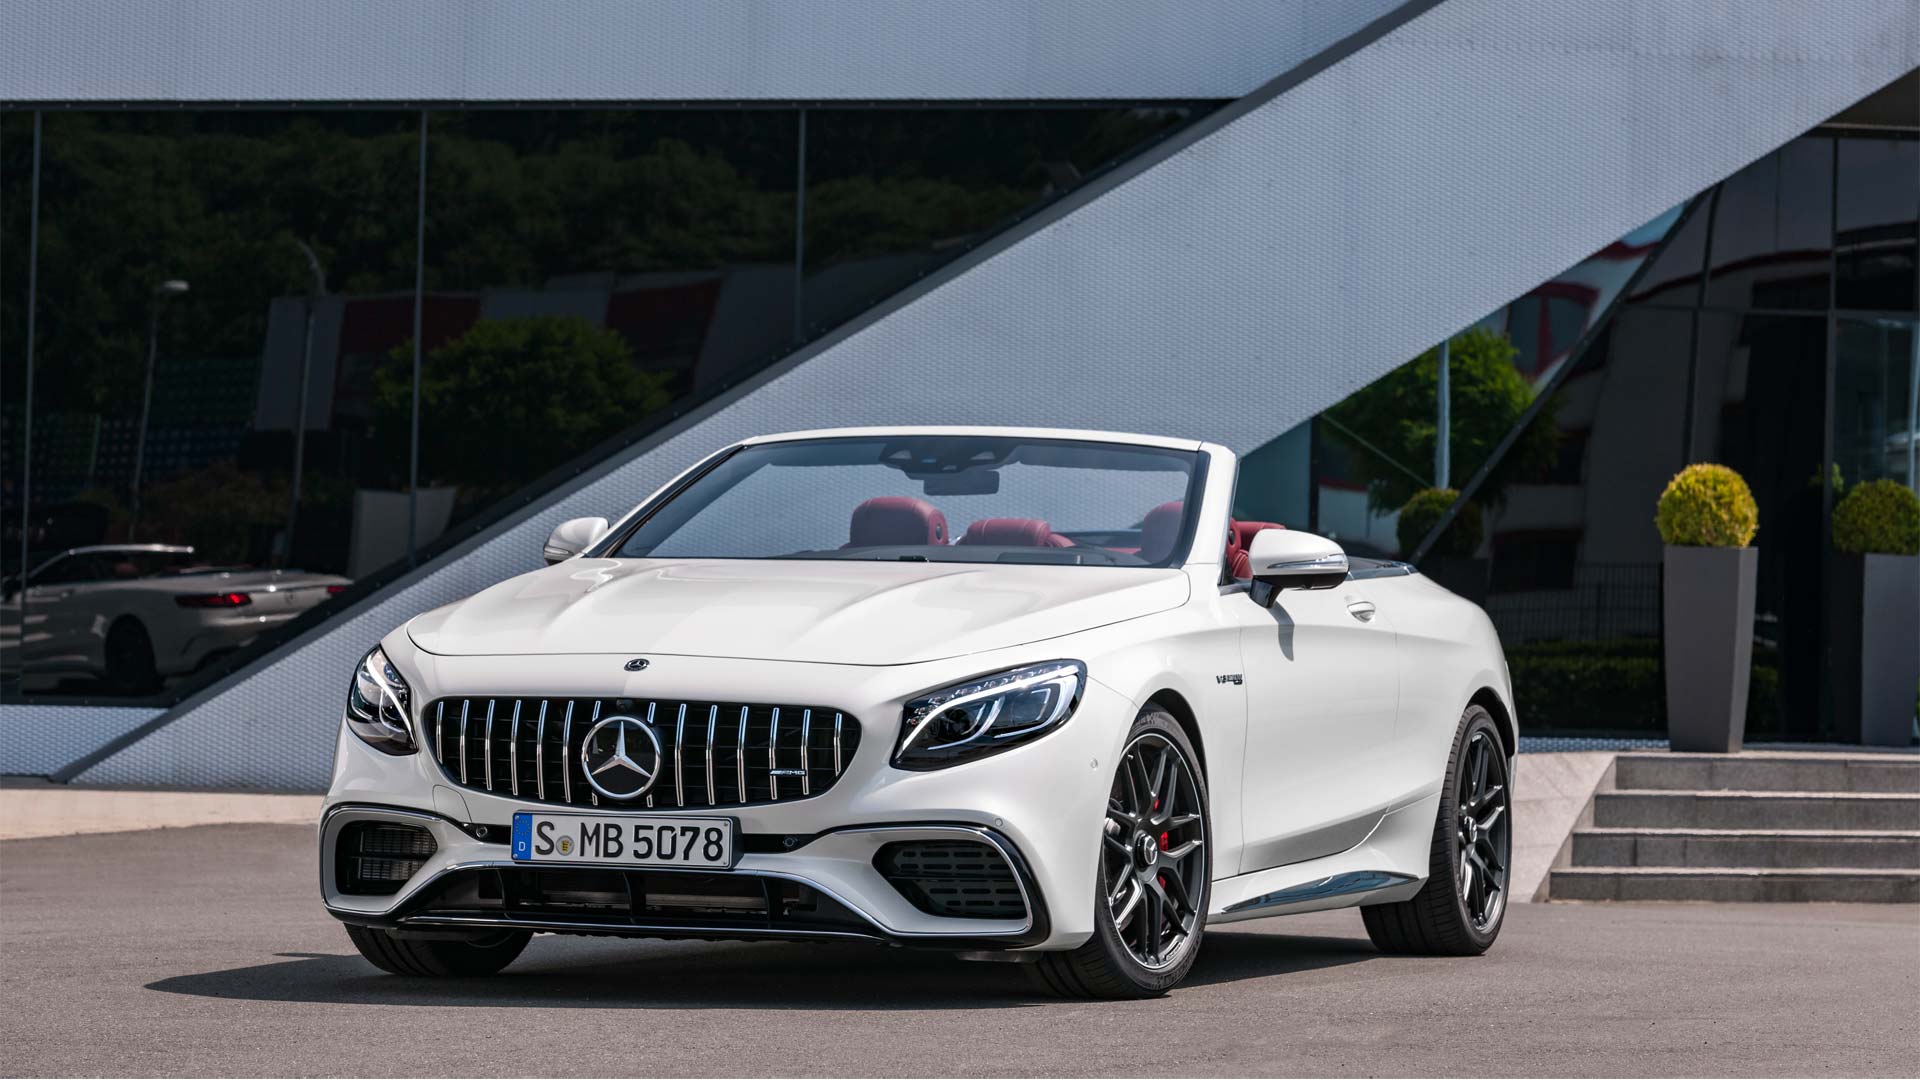 2018-Mercedes-AMG-S-63-4MATIC+Cabriolet